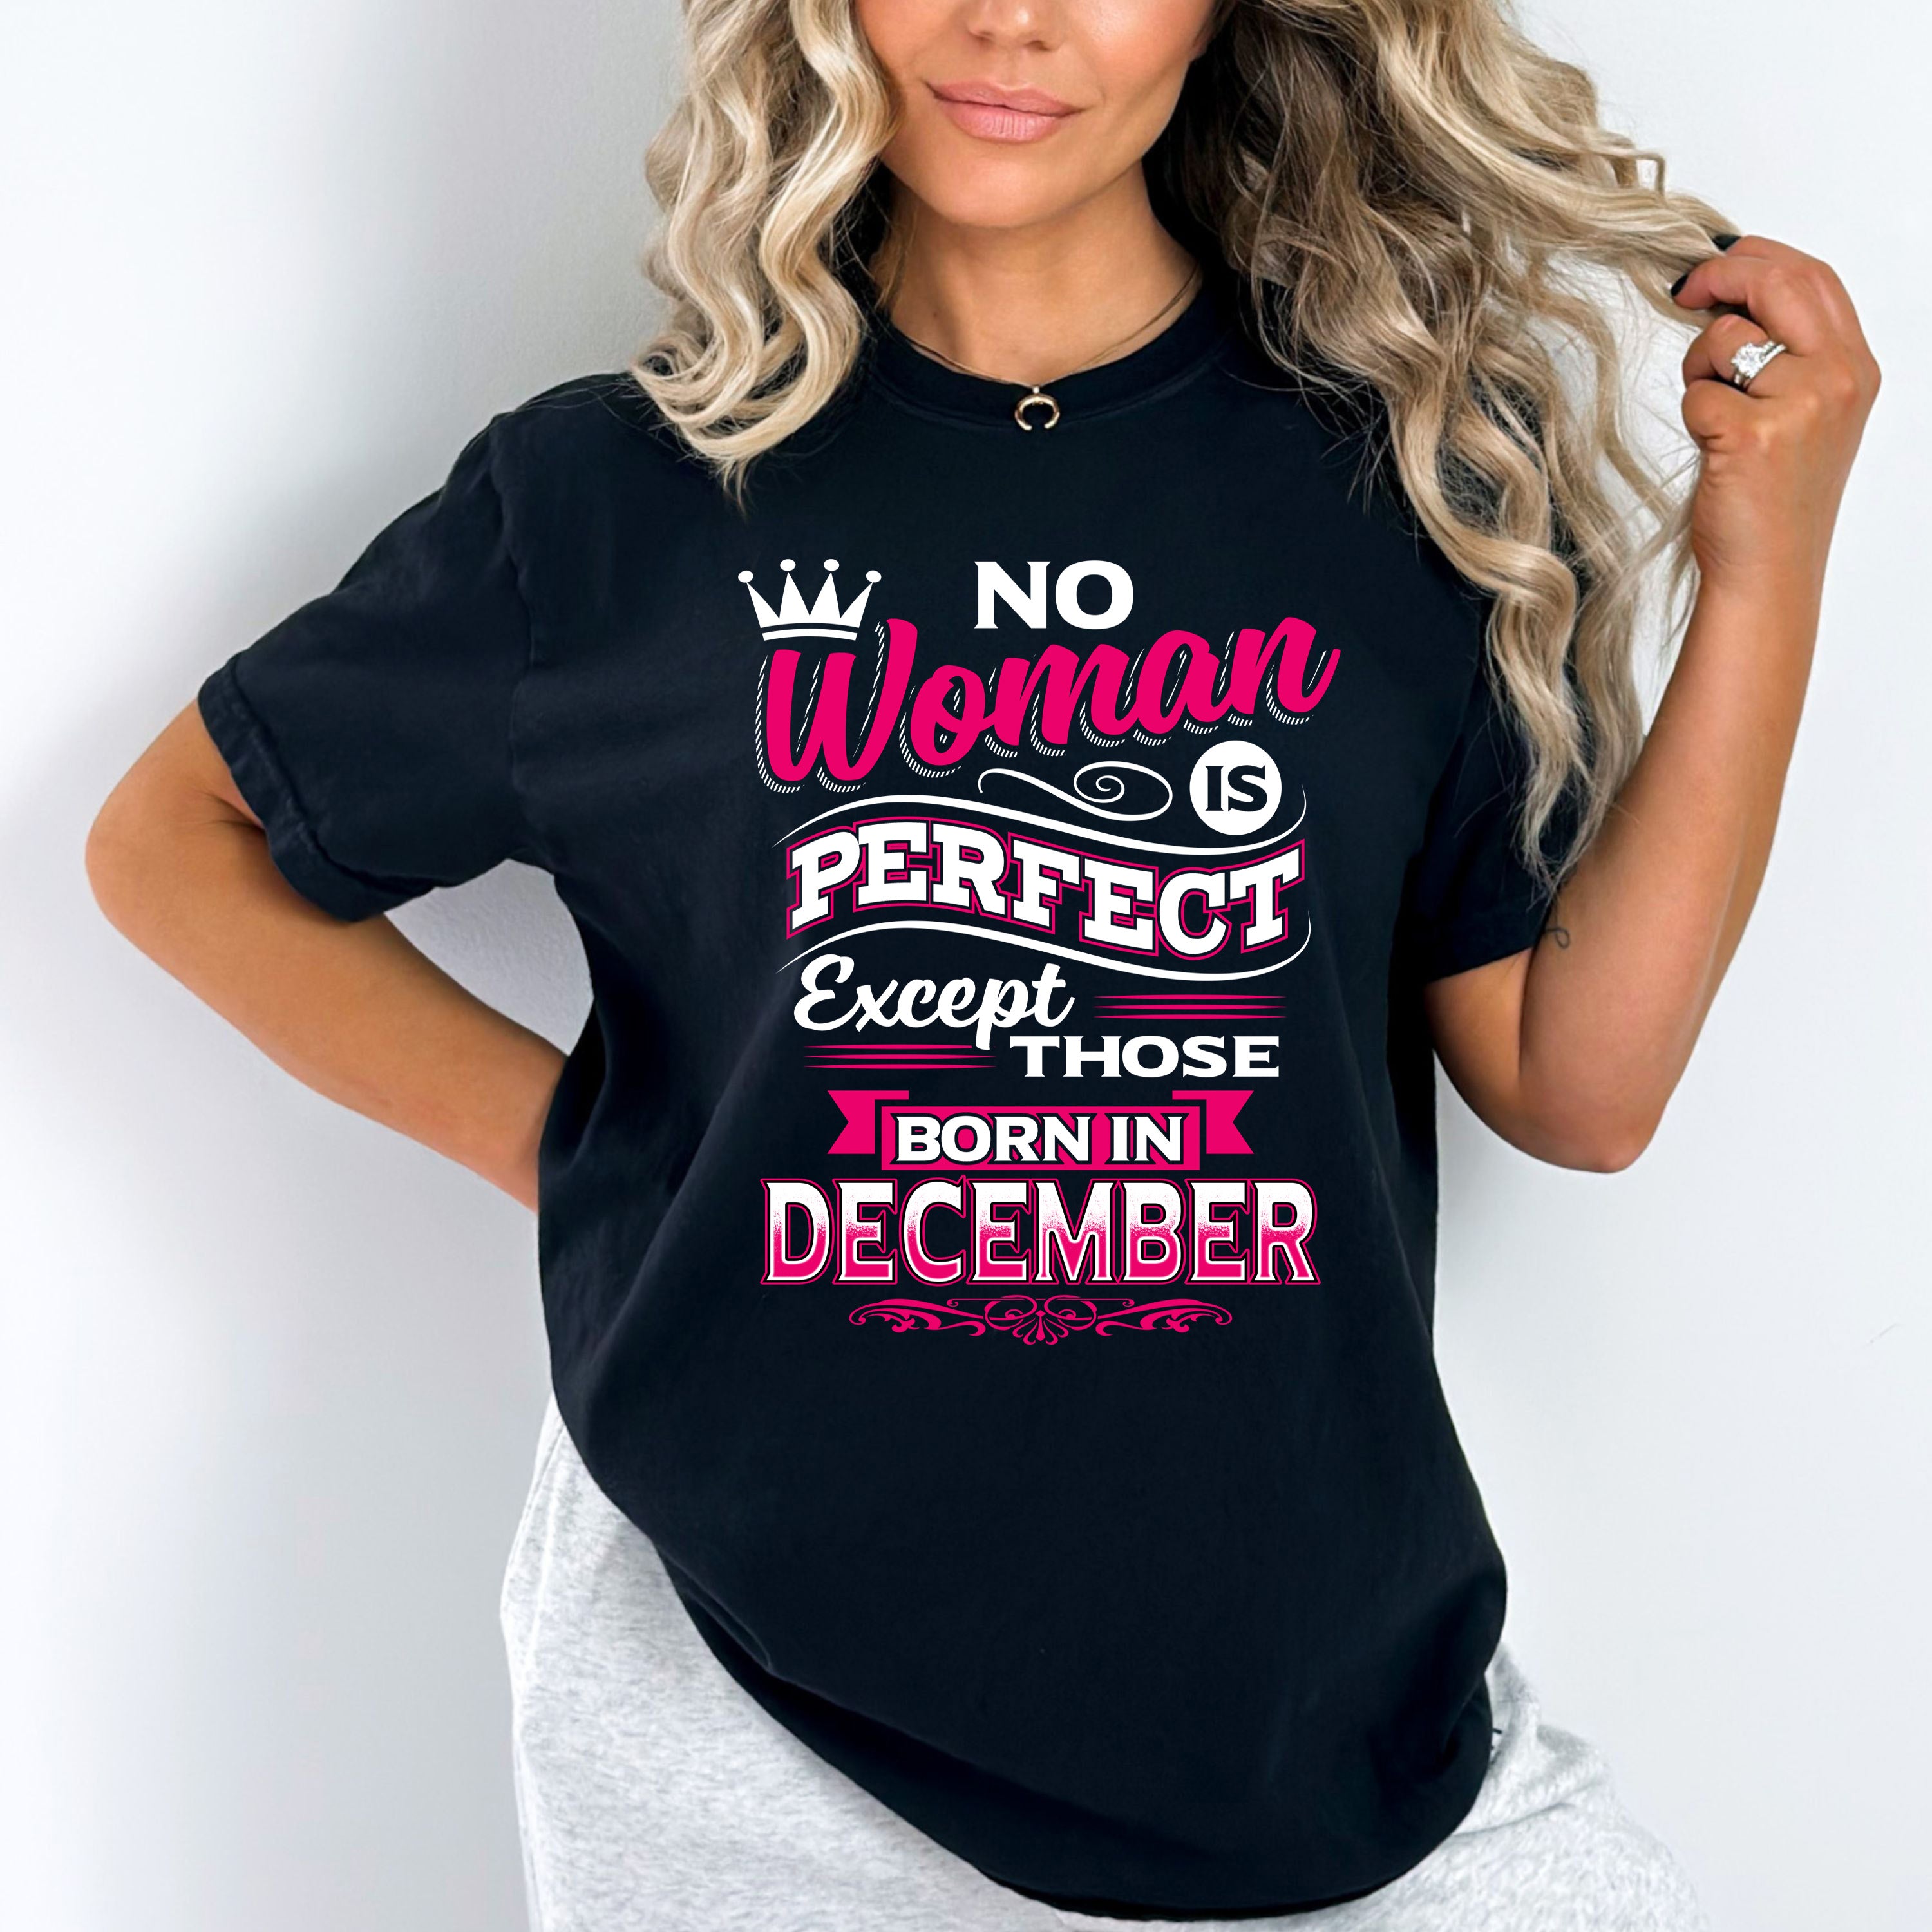 "No Woman Is Perfect Except December Born"